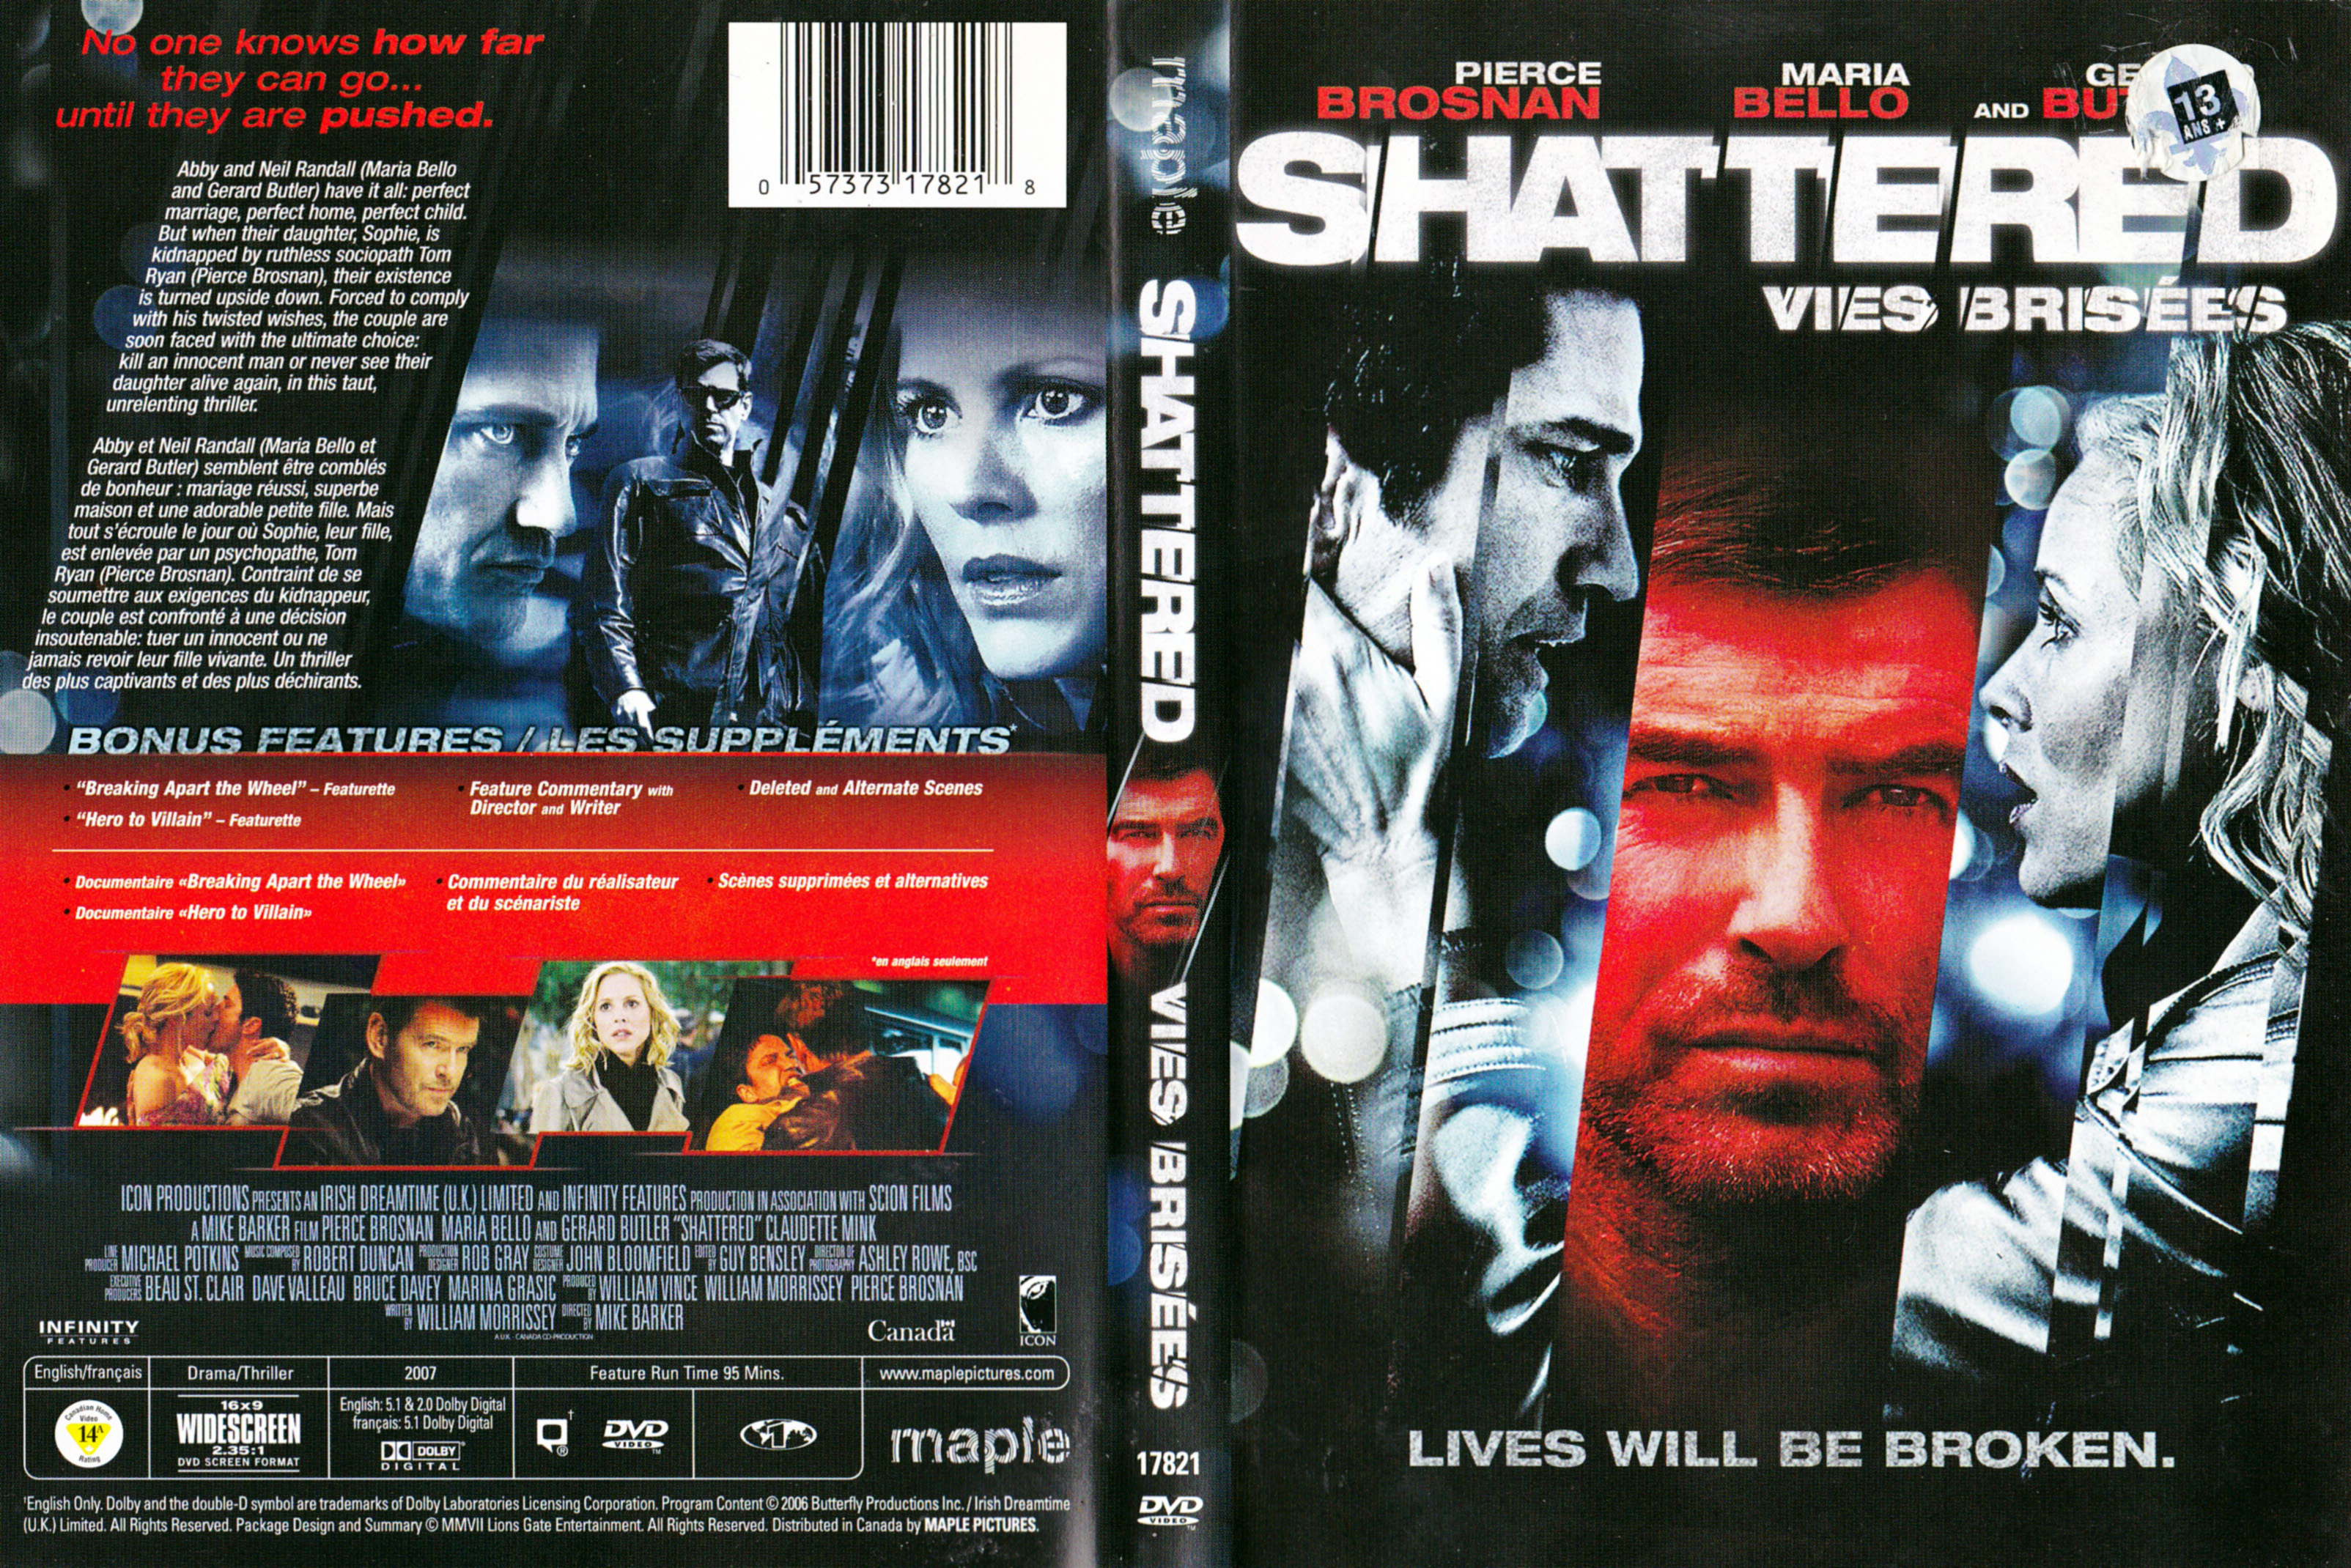 Jaquette DVD Vies brises - Shatered (Canadienne)